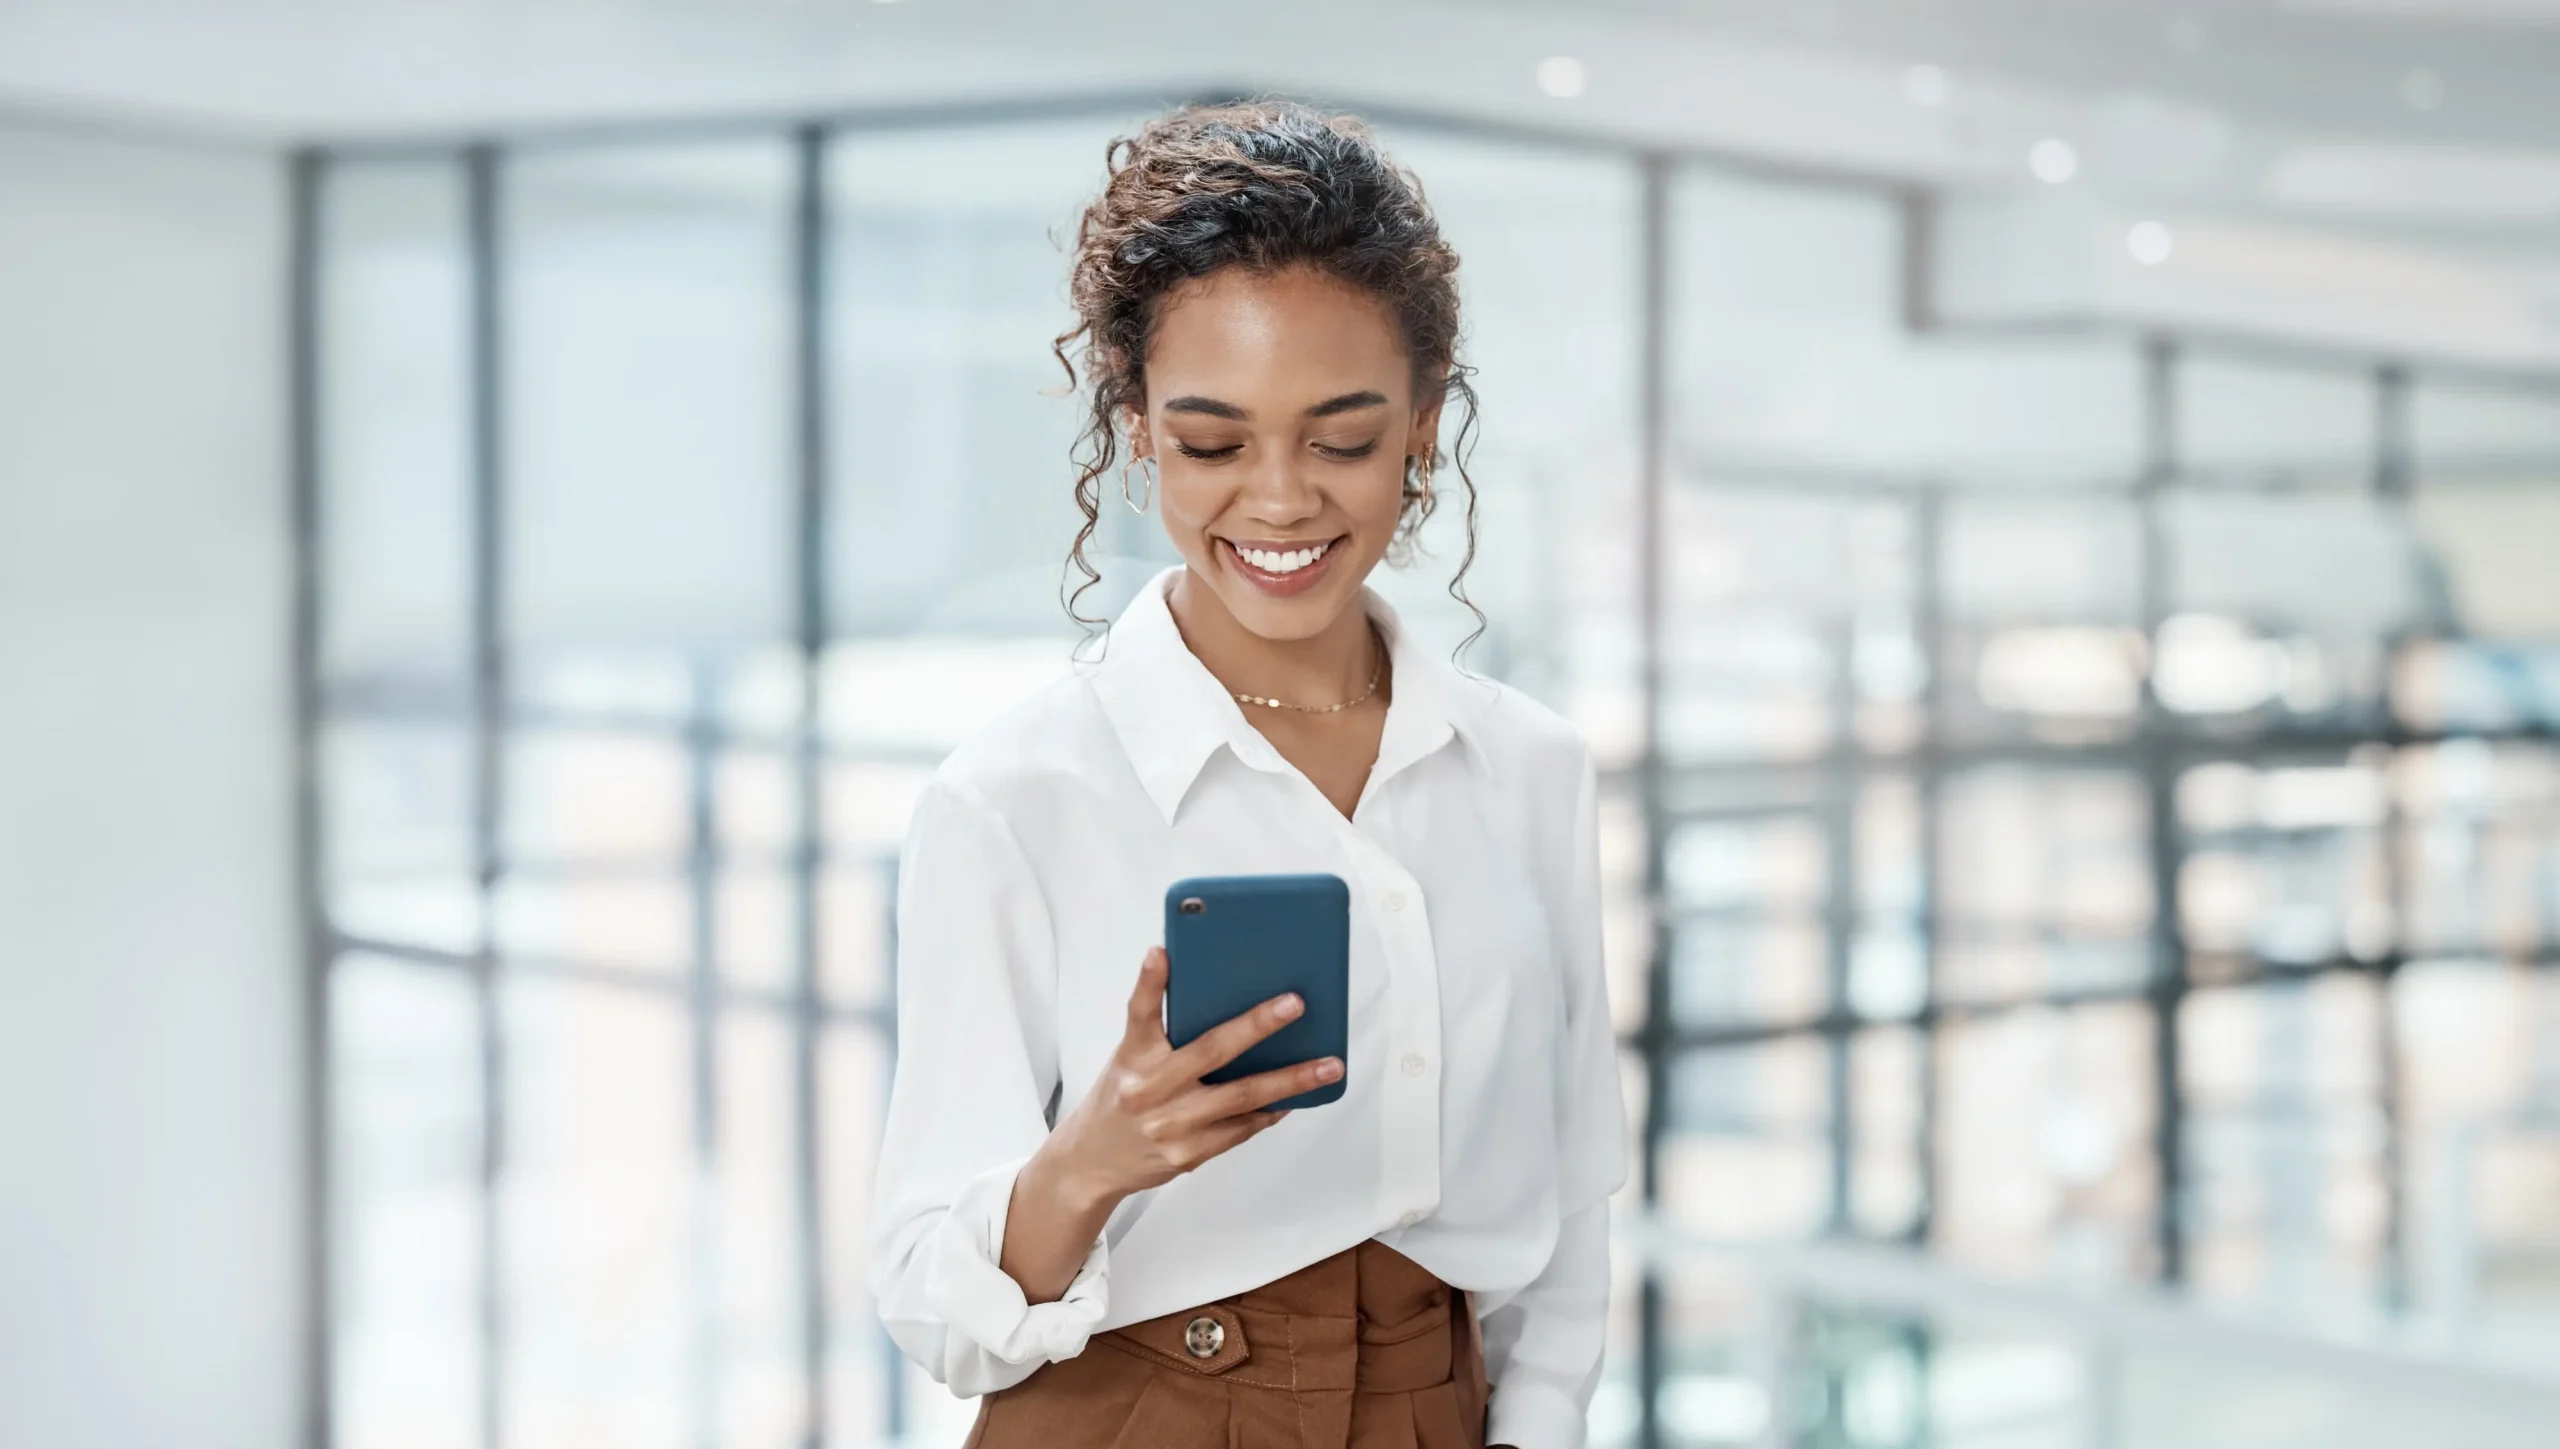 Woman in office looking at her phone and smiling